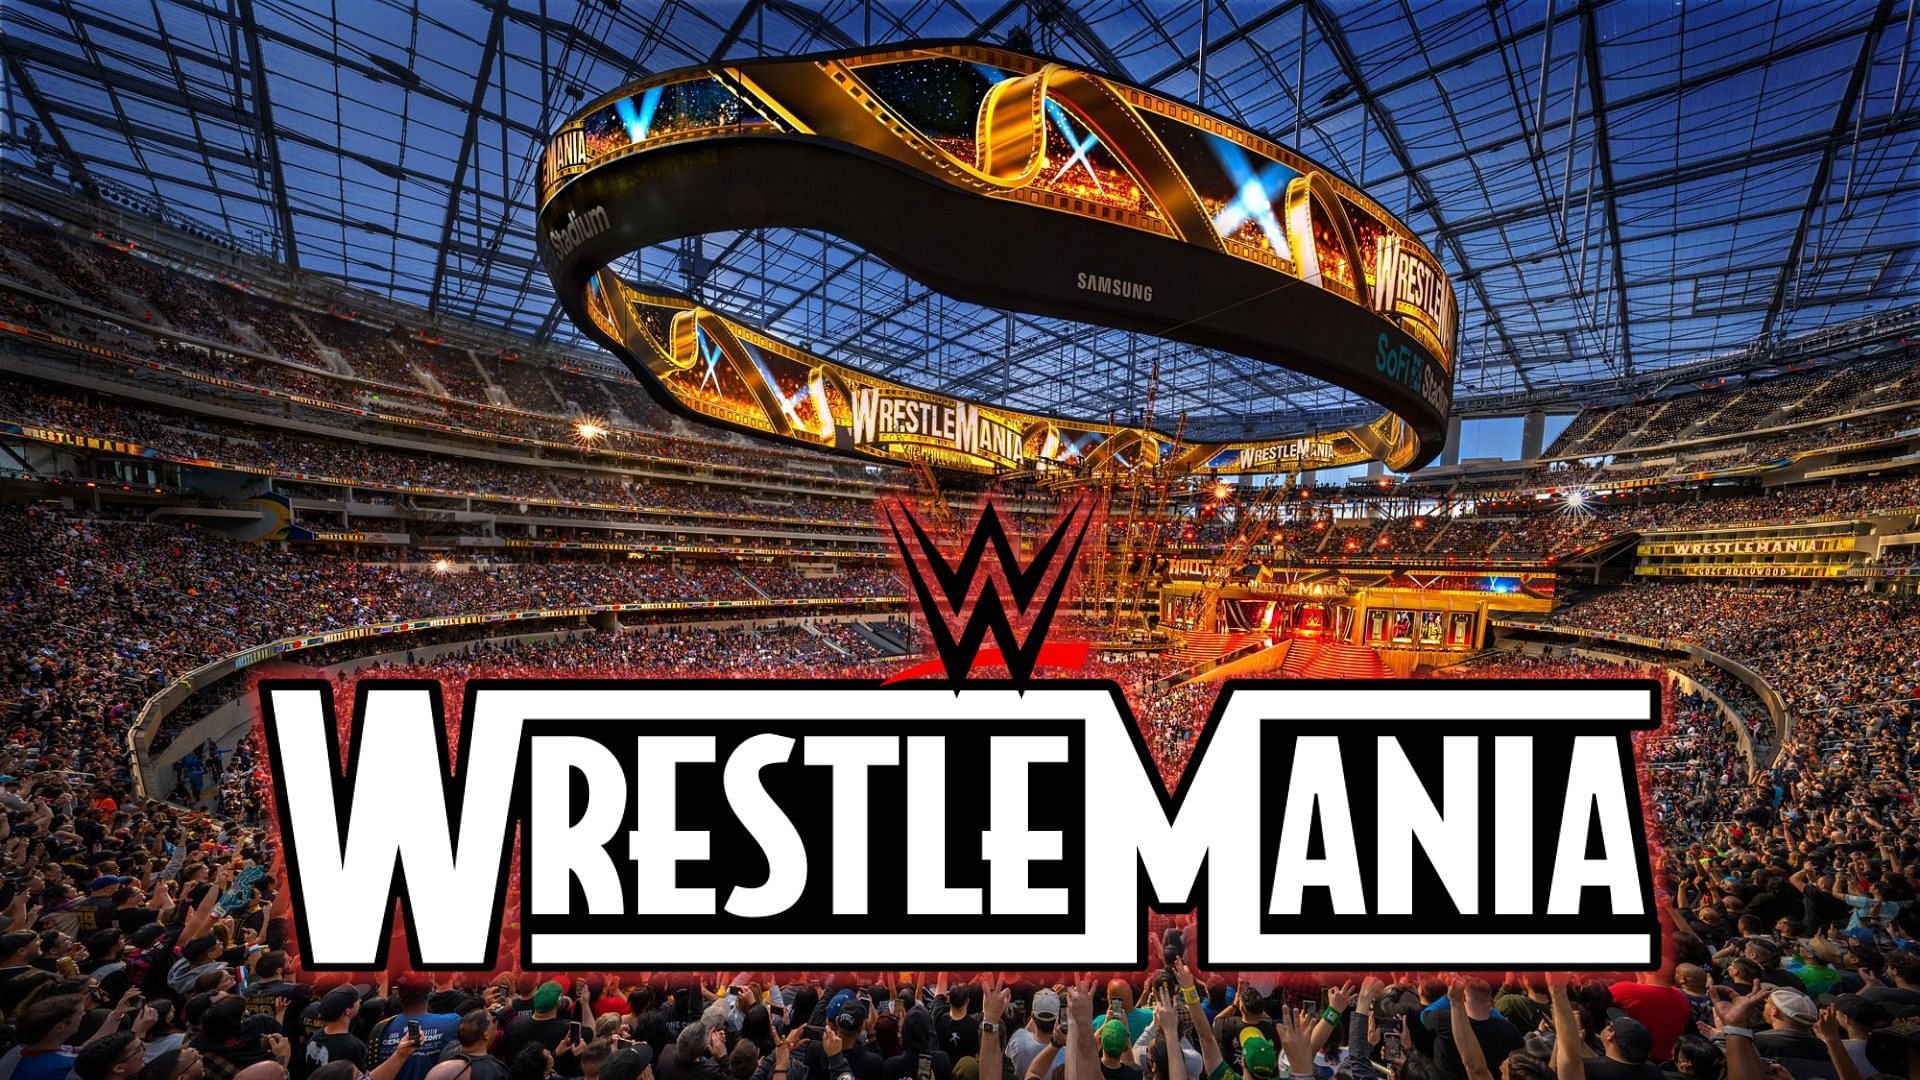 A major star may never appear at WWE WrestleMania